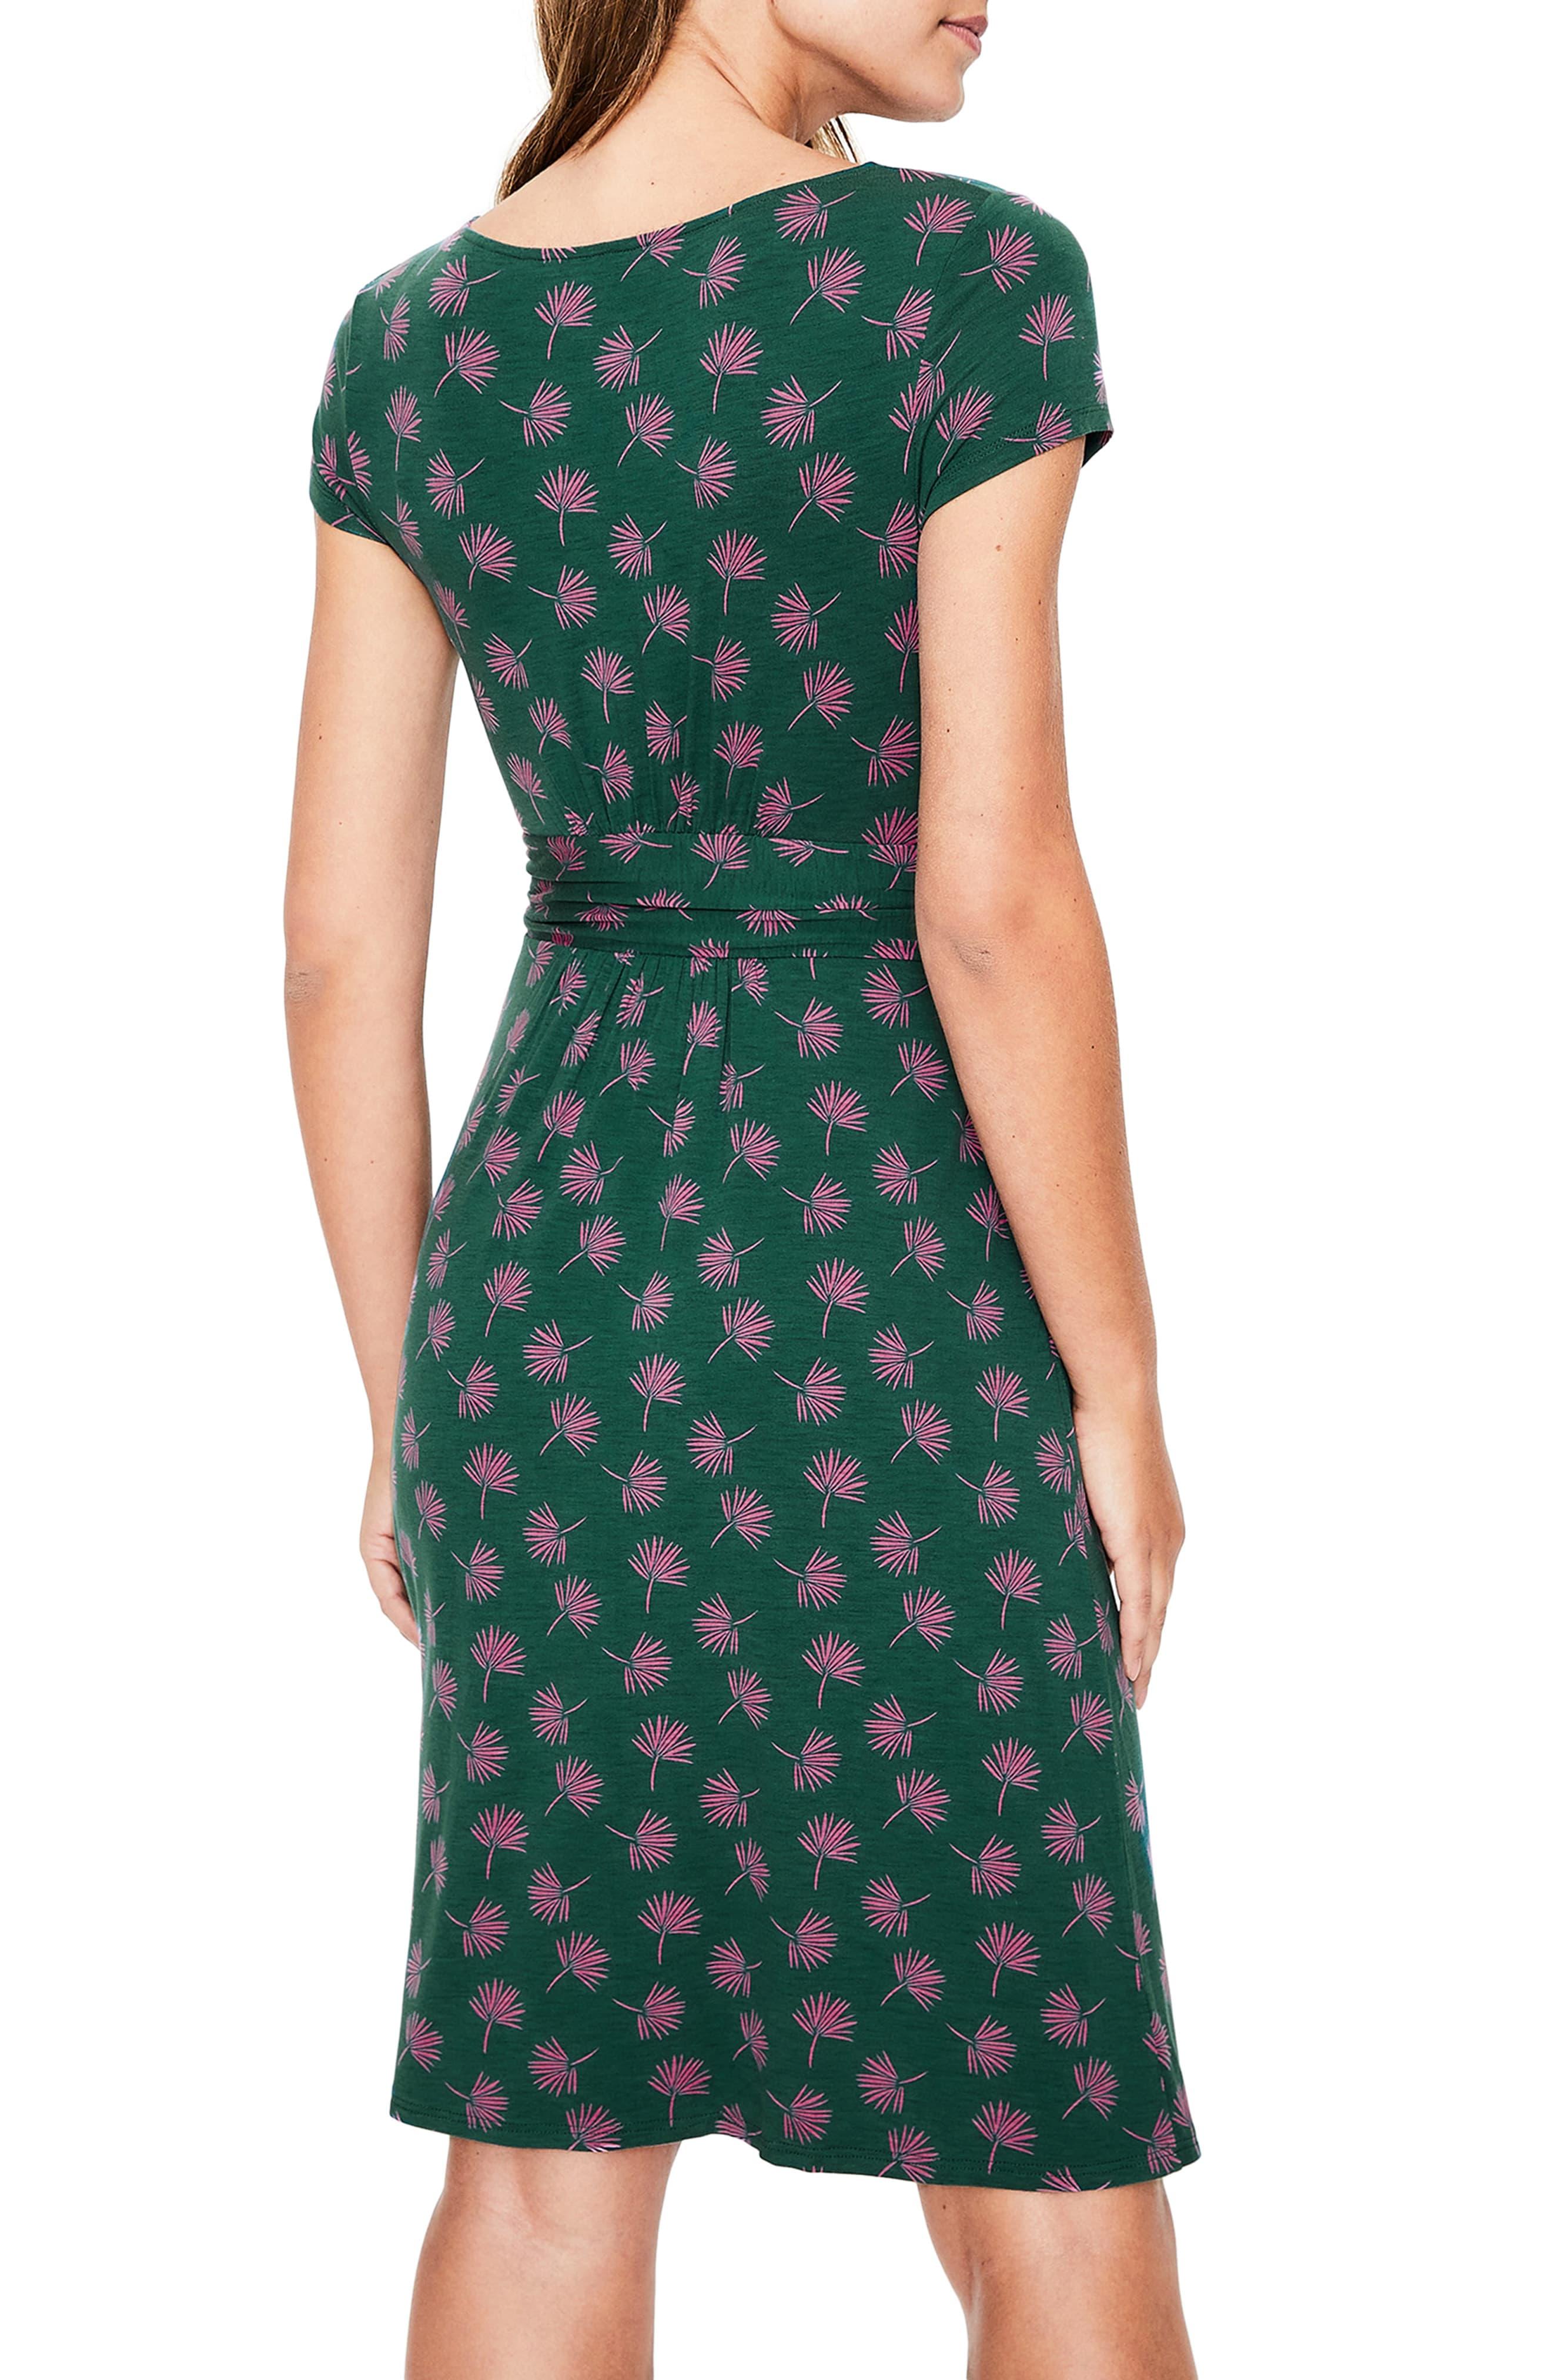 Boden Amelie Palm Print Jersey Fit & Flare Dress in Green - Lyst